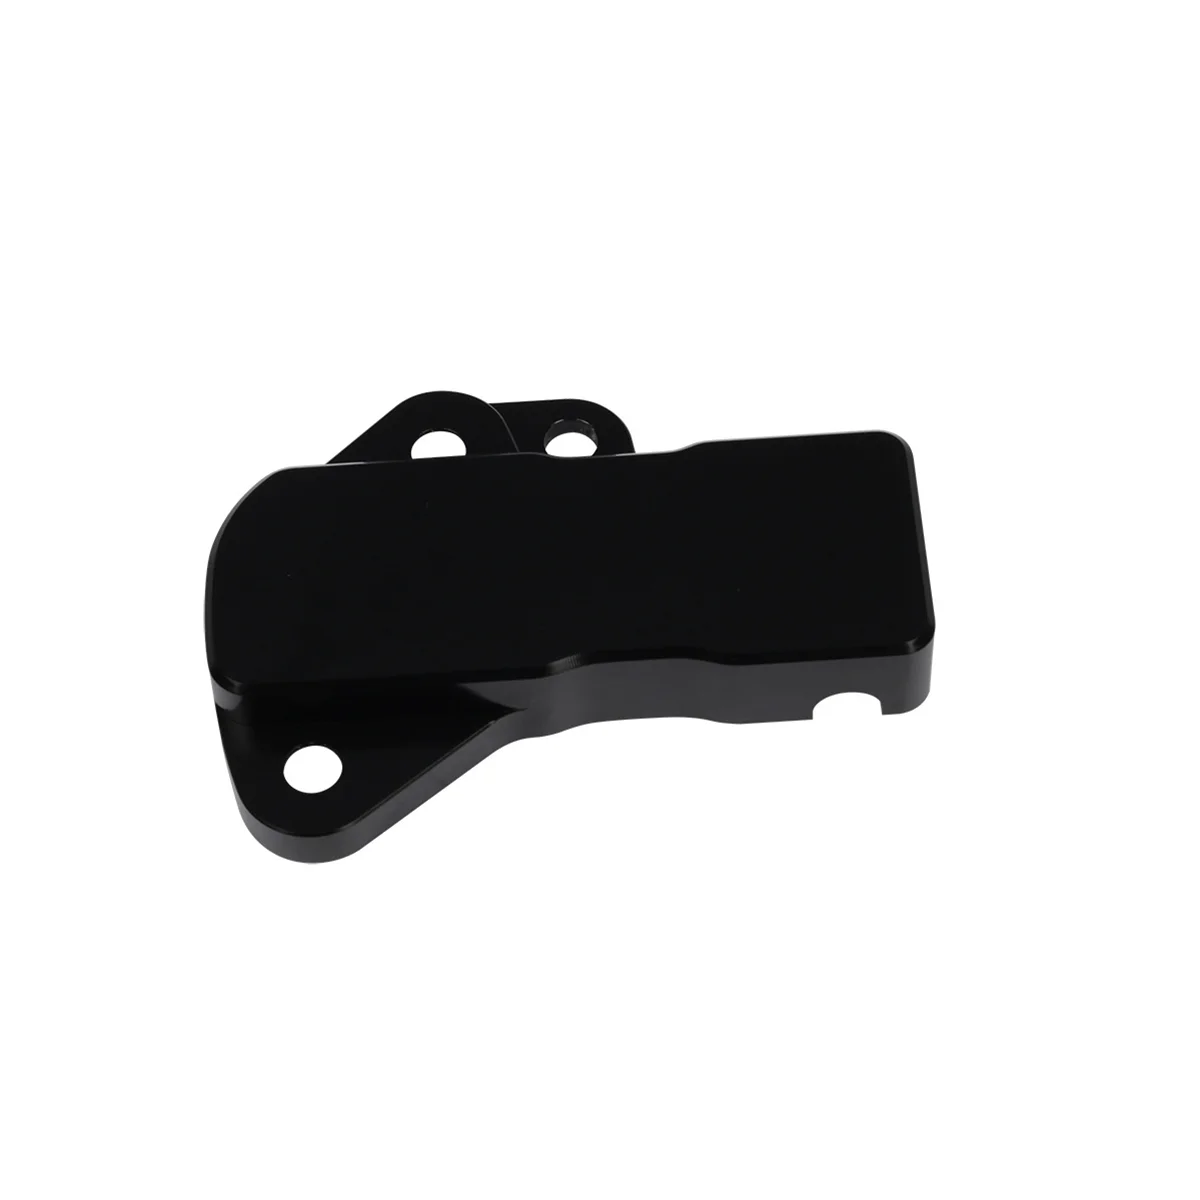 

Motorcycle Sensor Guard Cover Protector for KTM EXC XCW 150 250 300 EXC250 EXC300 TPI SIX Days(Black)